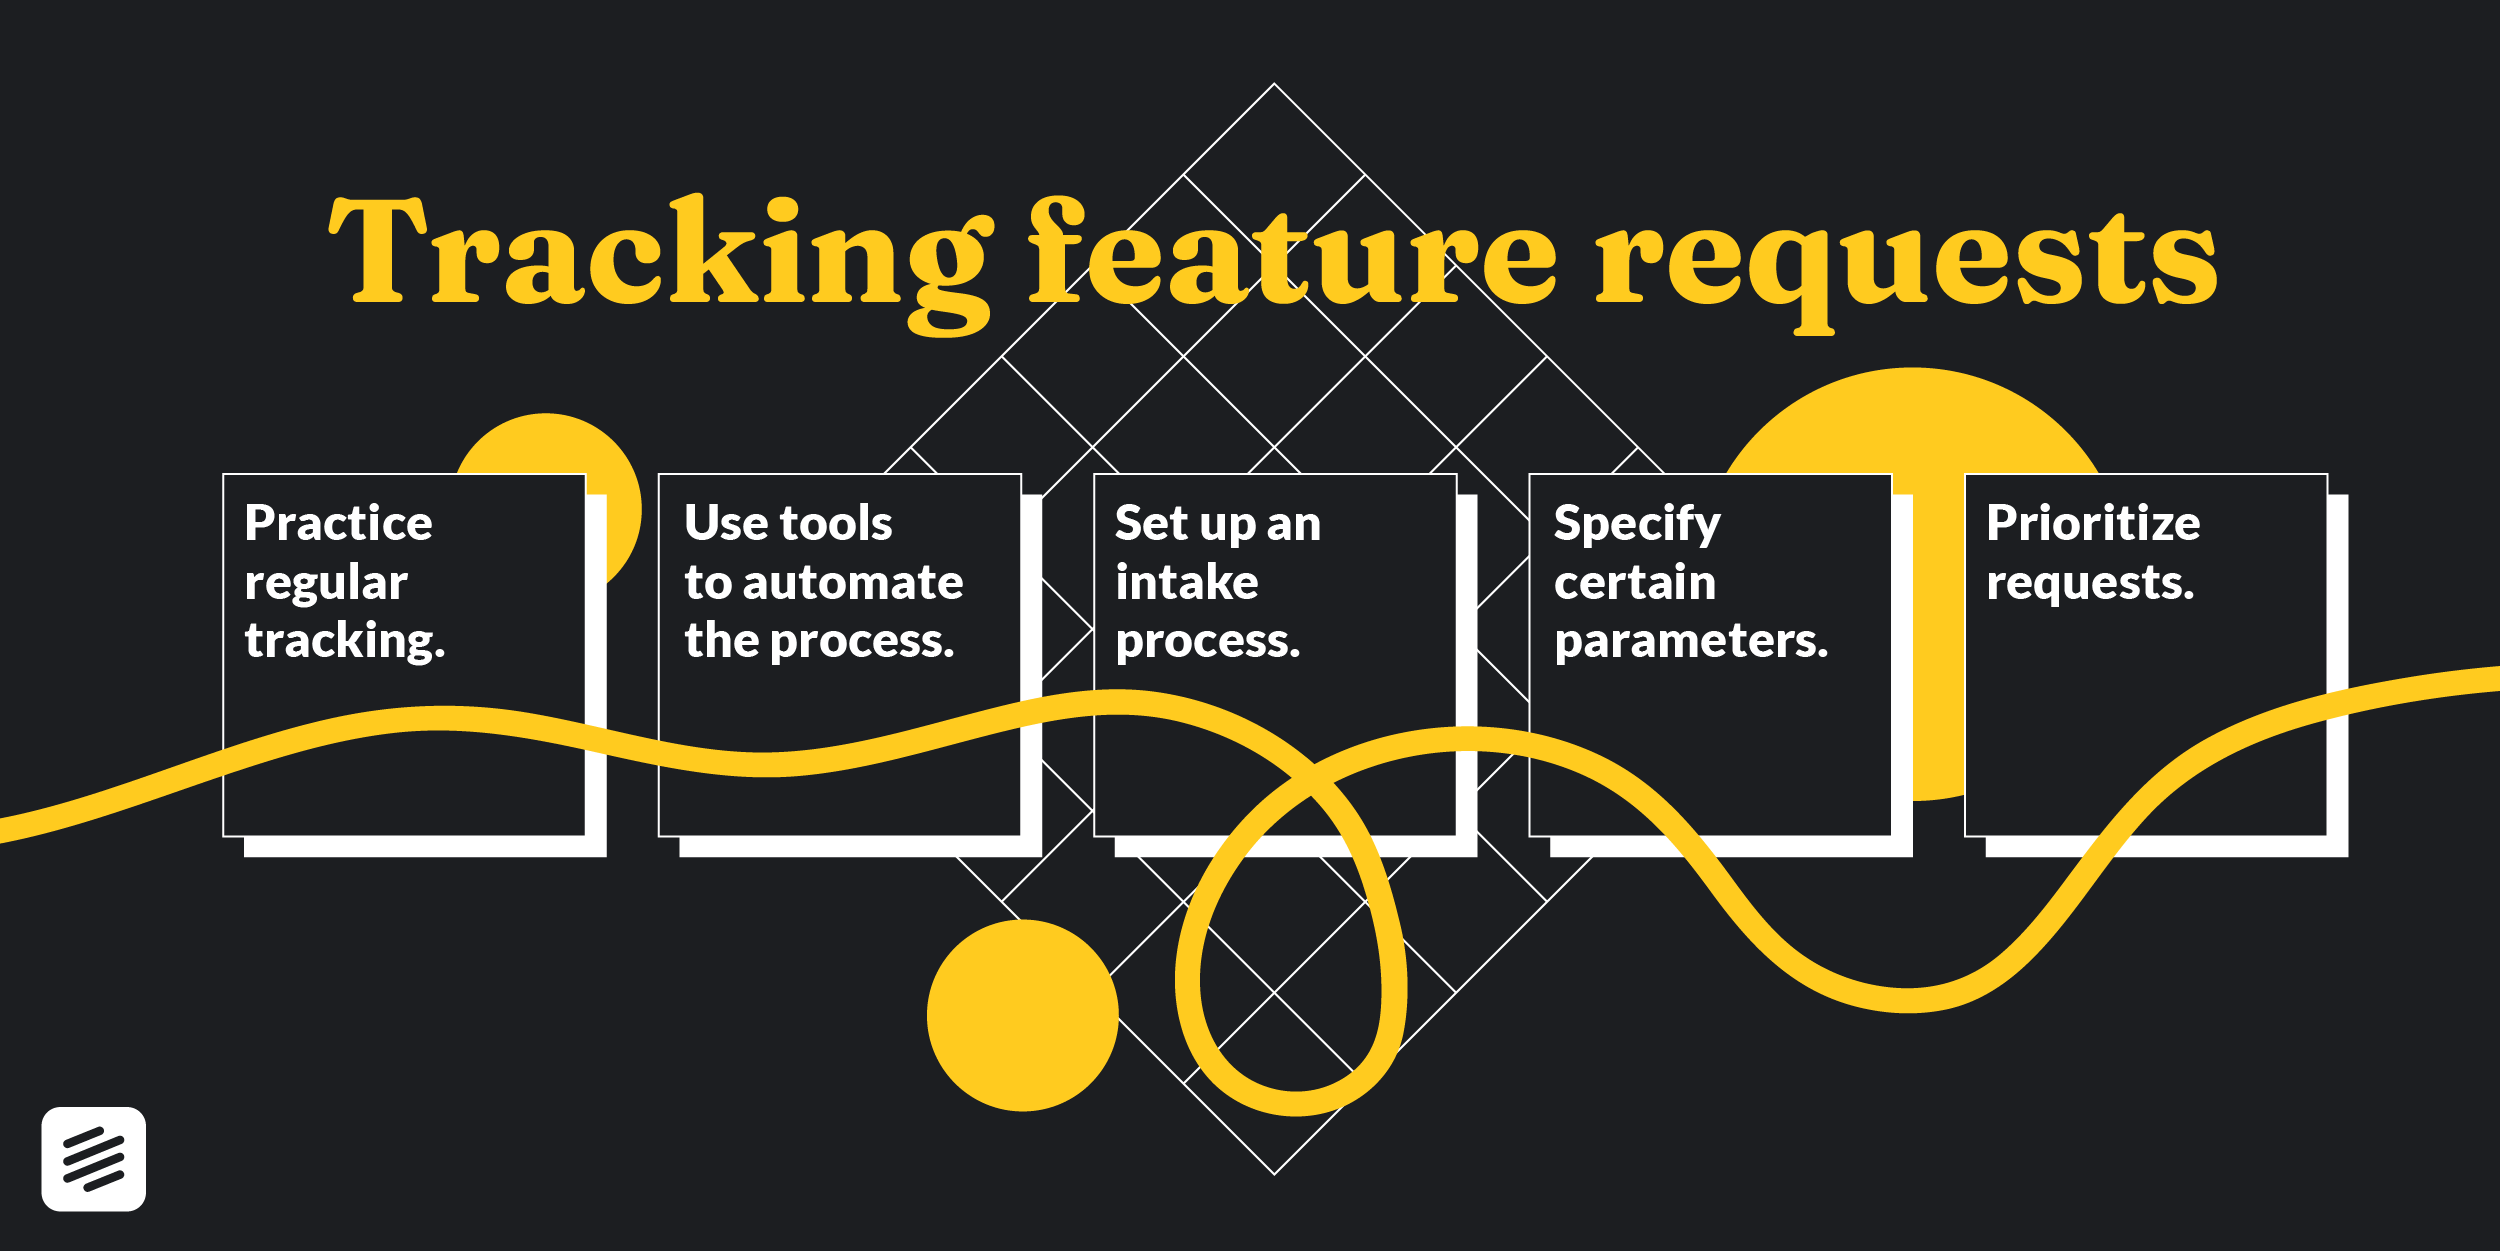 Tracking feature requests